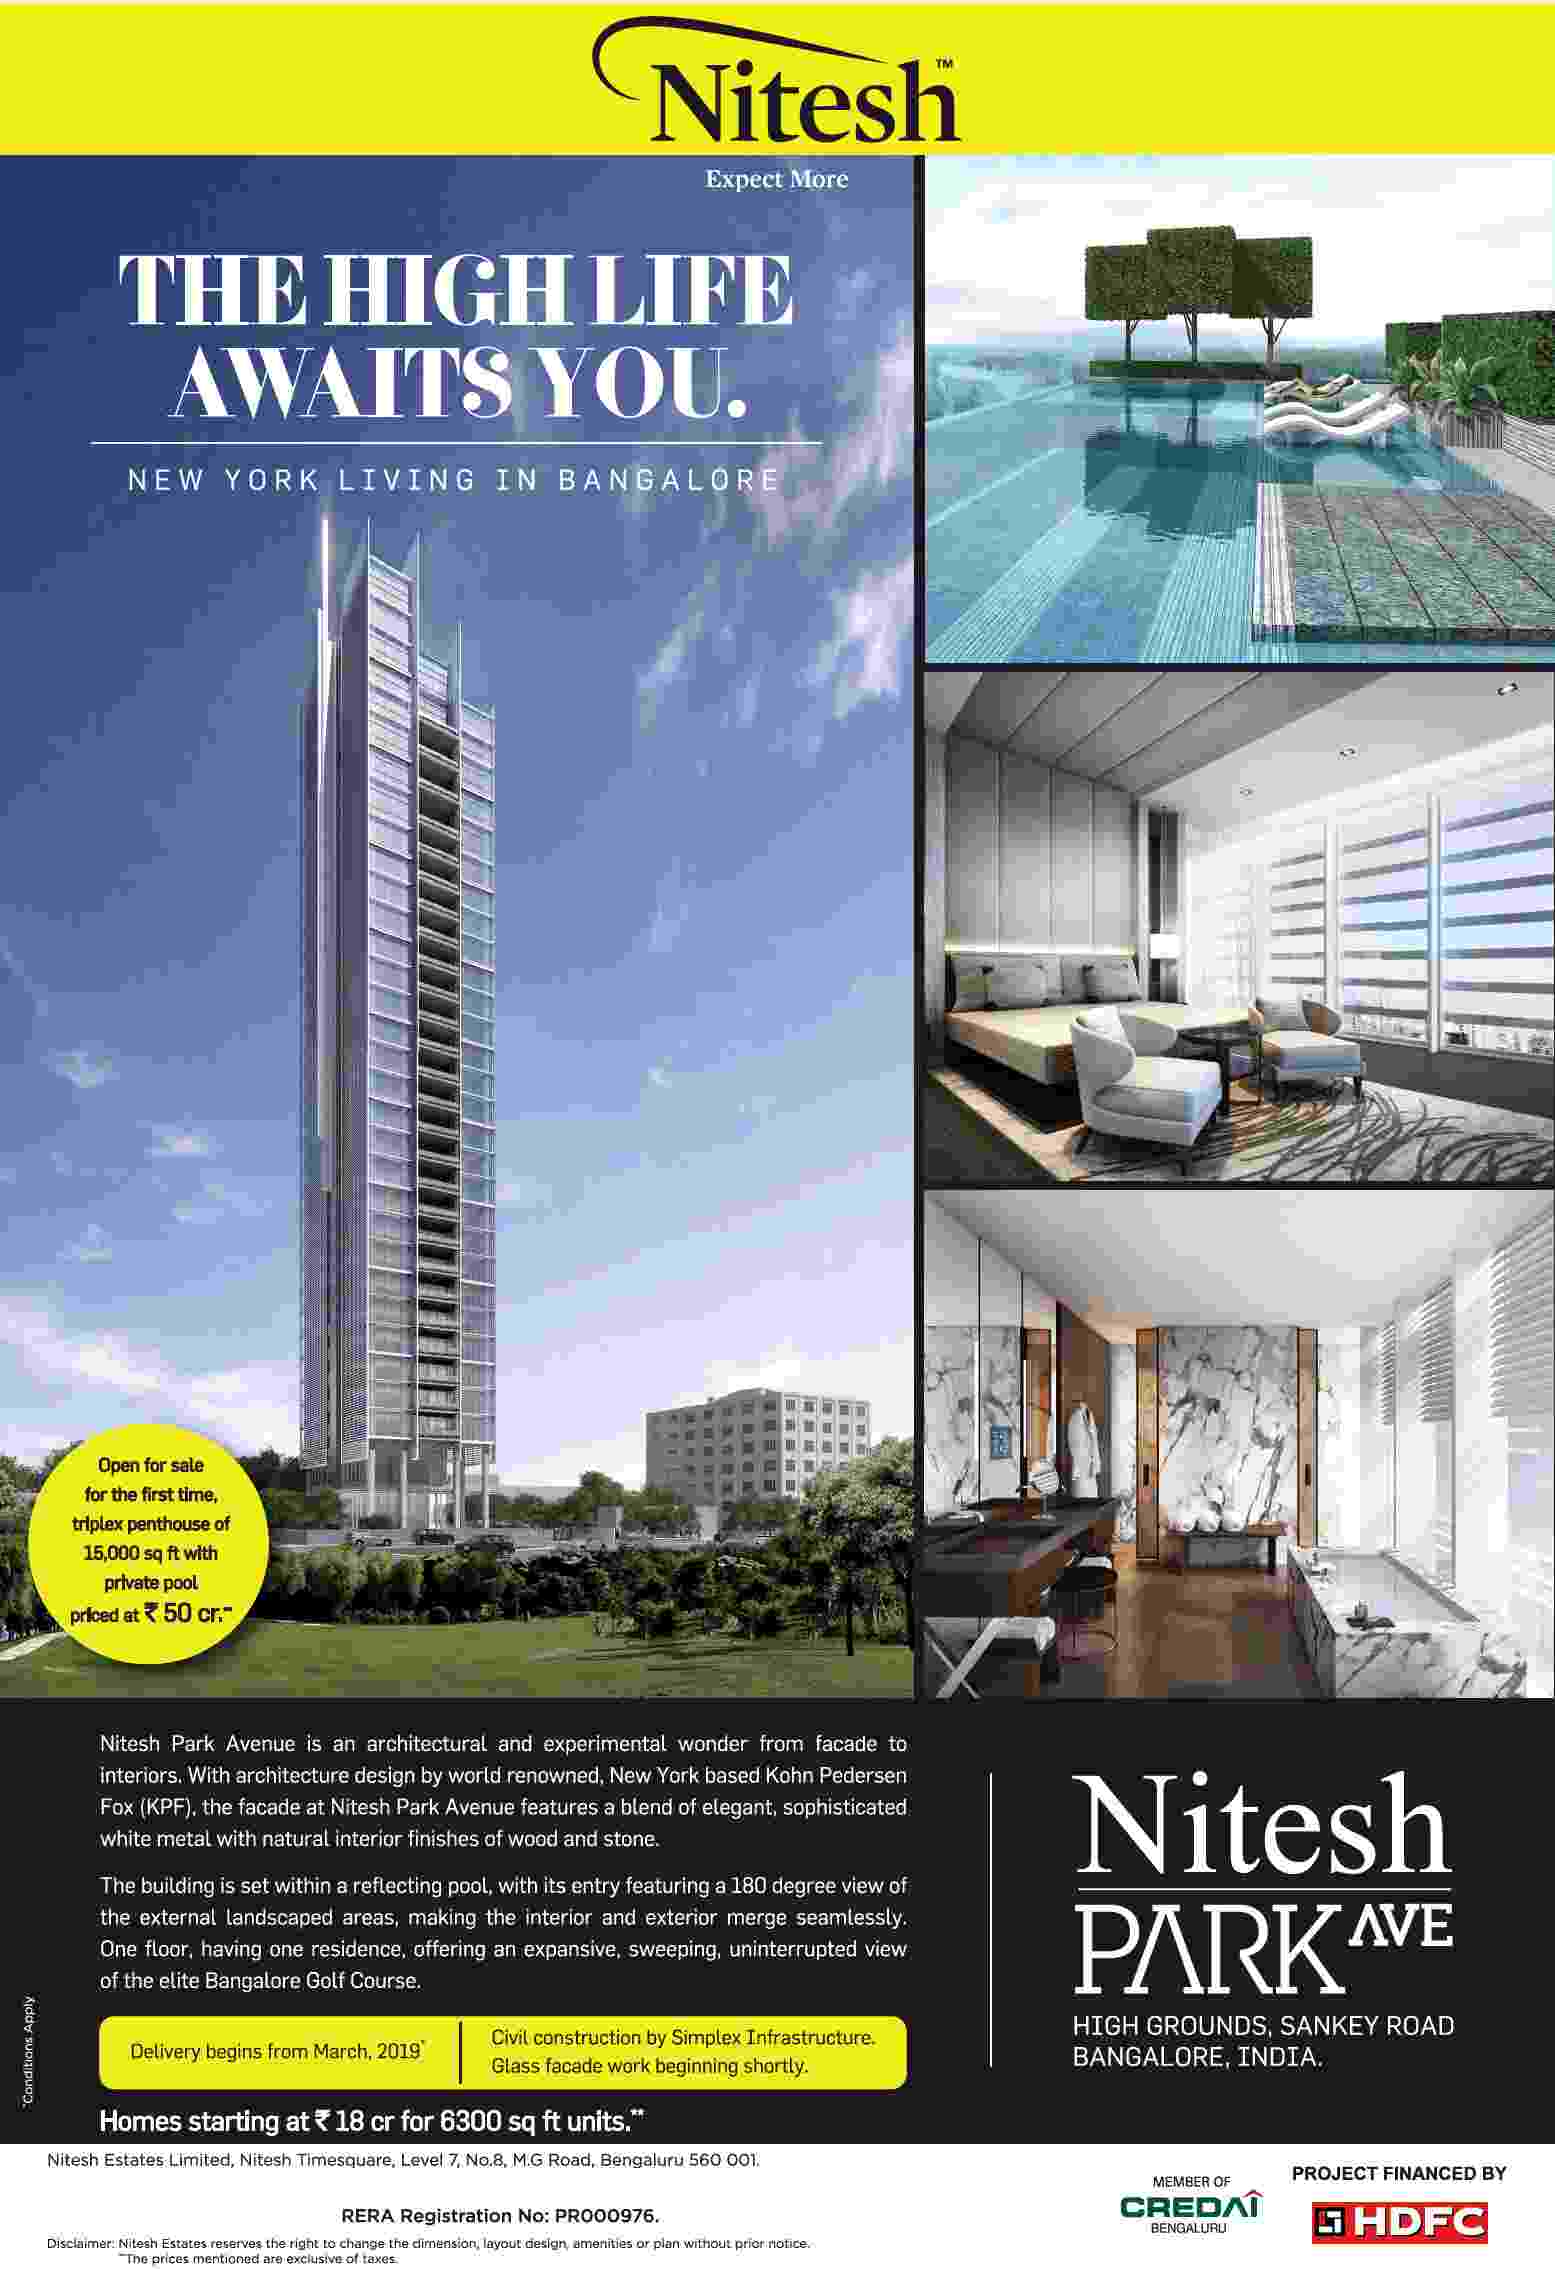 The high life awaits you at Nitesh Park Avenue in Bangalore Update